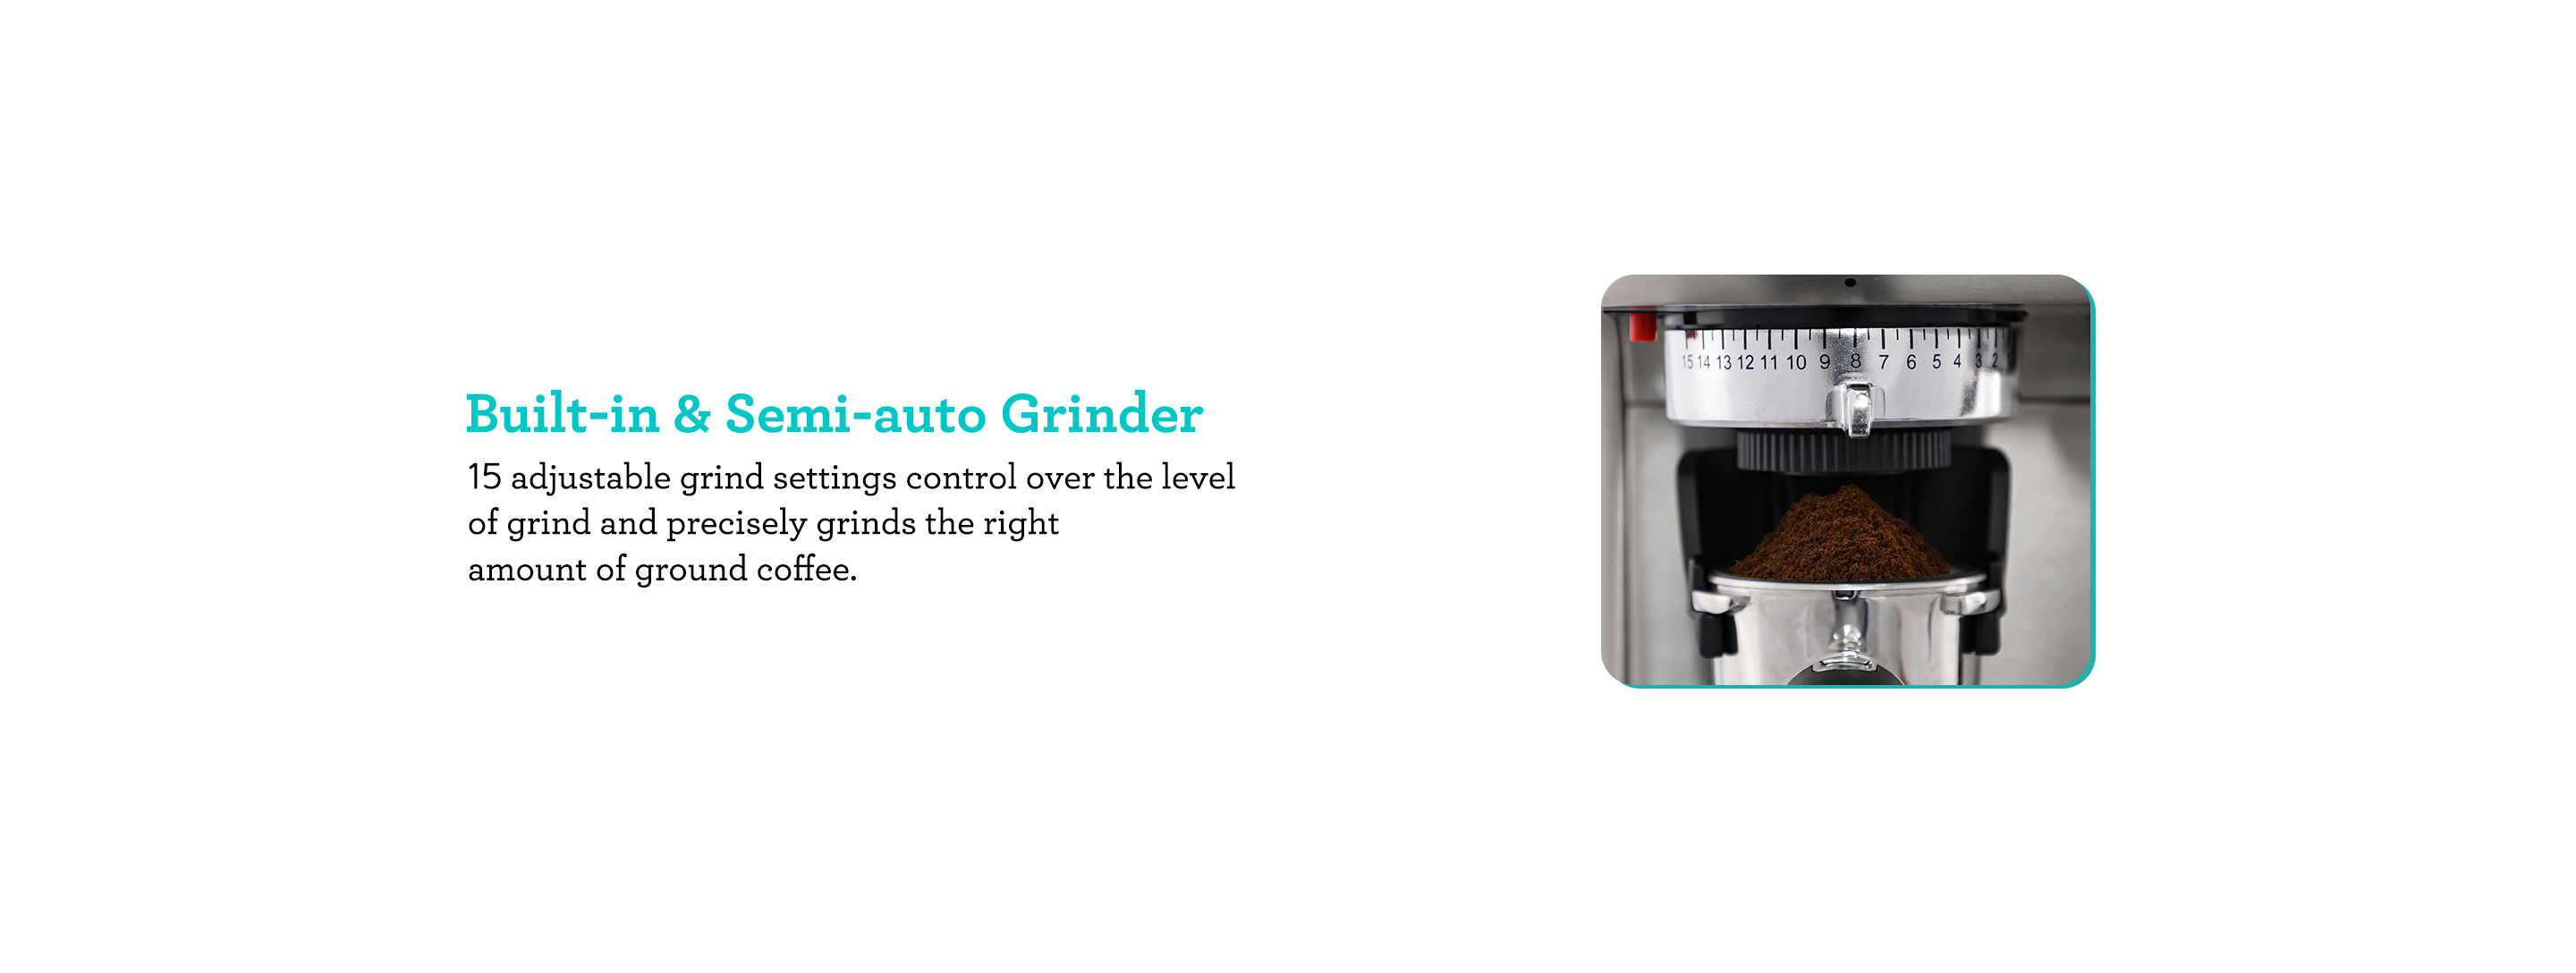 Built-in and semi suto grinder